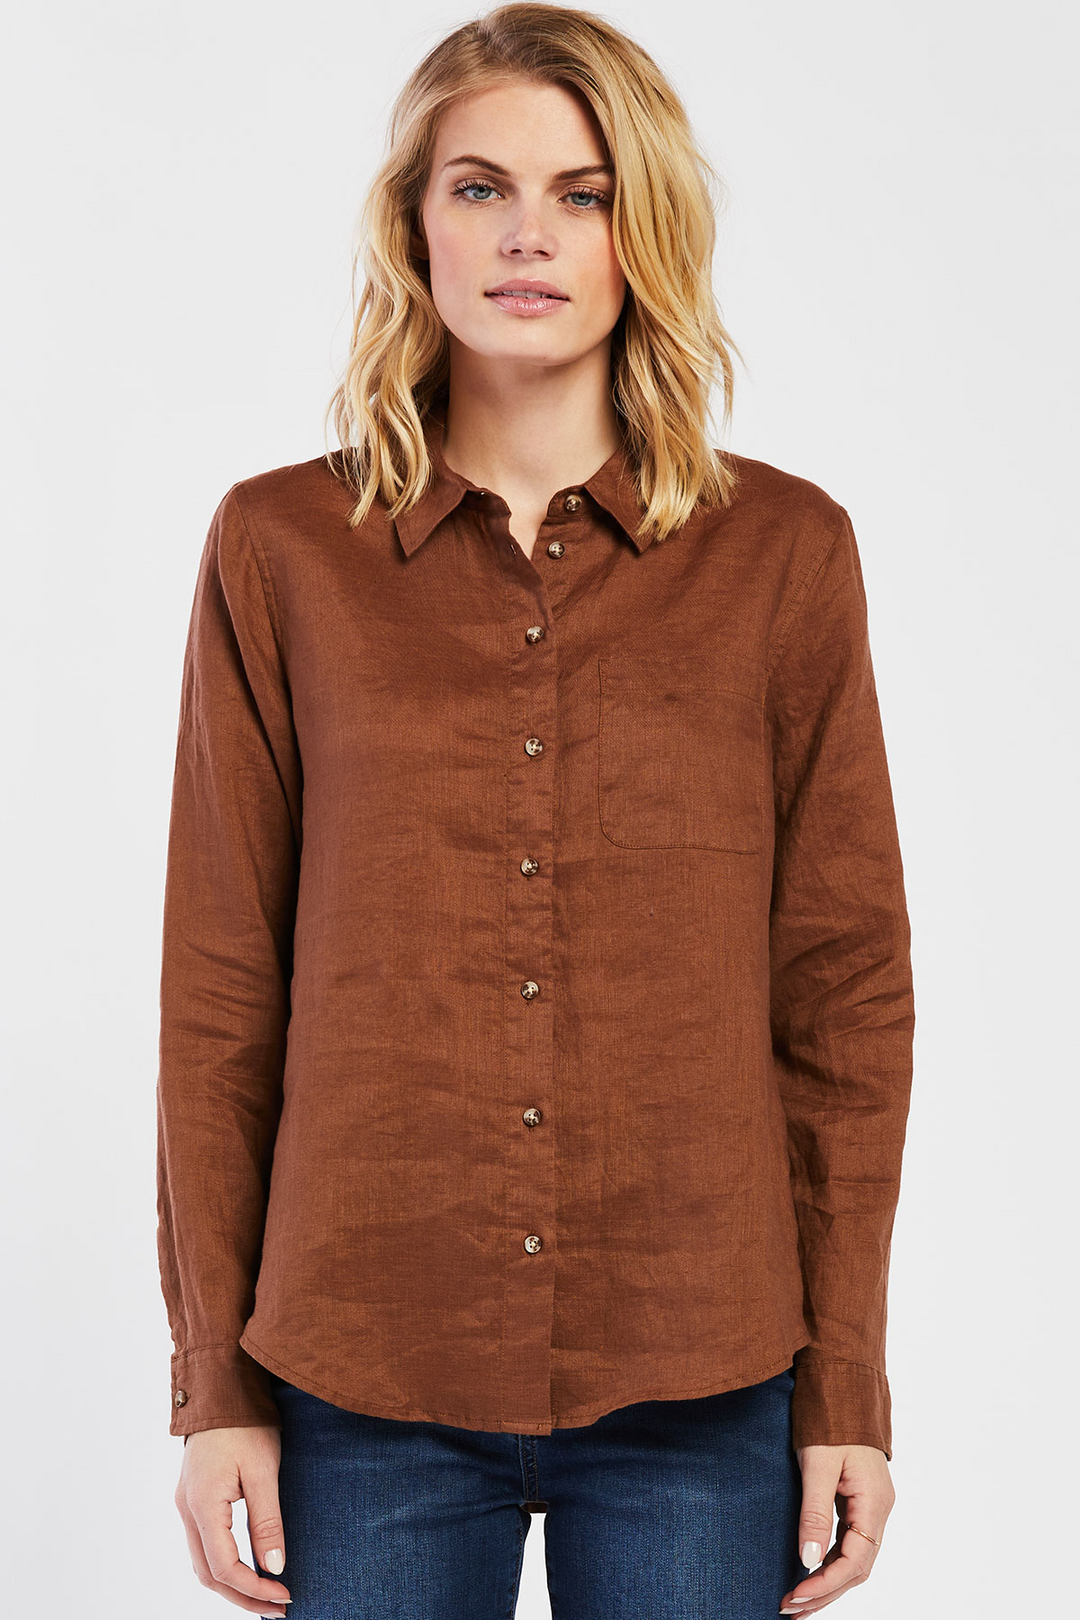 BELLE TOP - BROWN - Kingfisher Road - Online Boutique